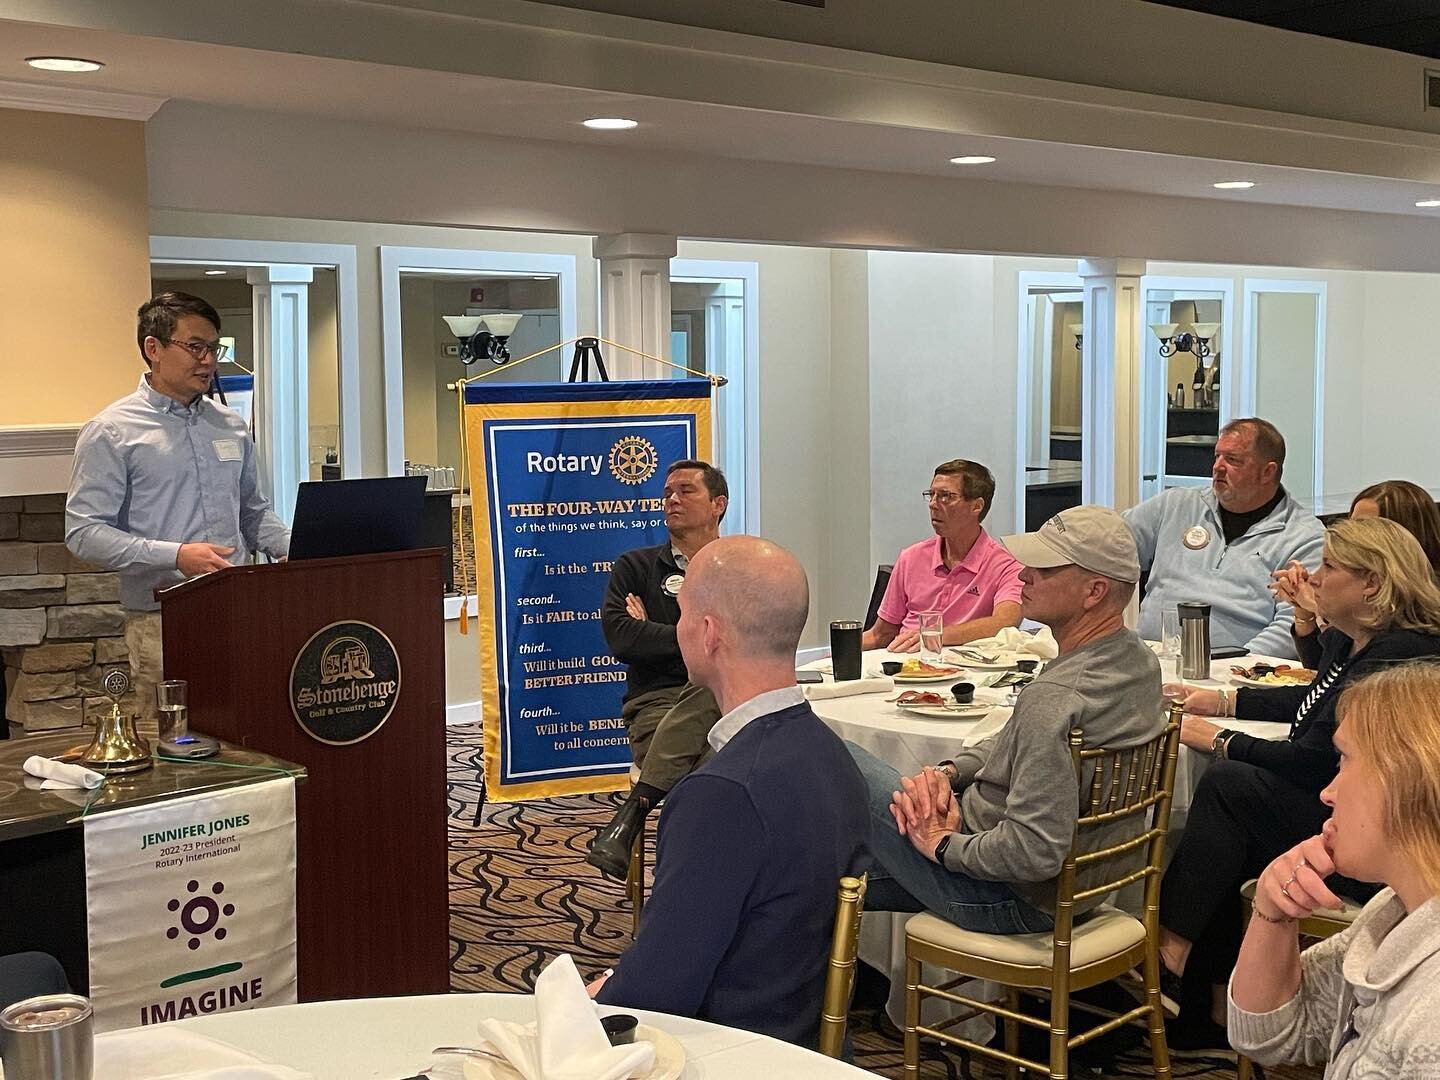 Thanks to Midlothian Rotary Club for inviting Dr. Qiu this morning to speak at their weekly meeting! Always fun to spread the word about direct primary care. 

#directprimarycare #midlothianva #rotary #richmondva #primarycare #familymedicine #rva @ro